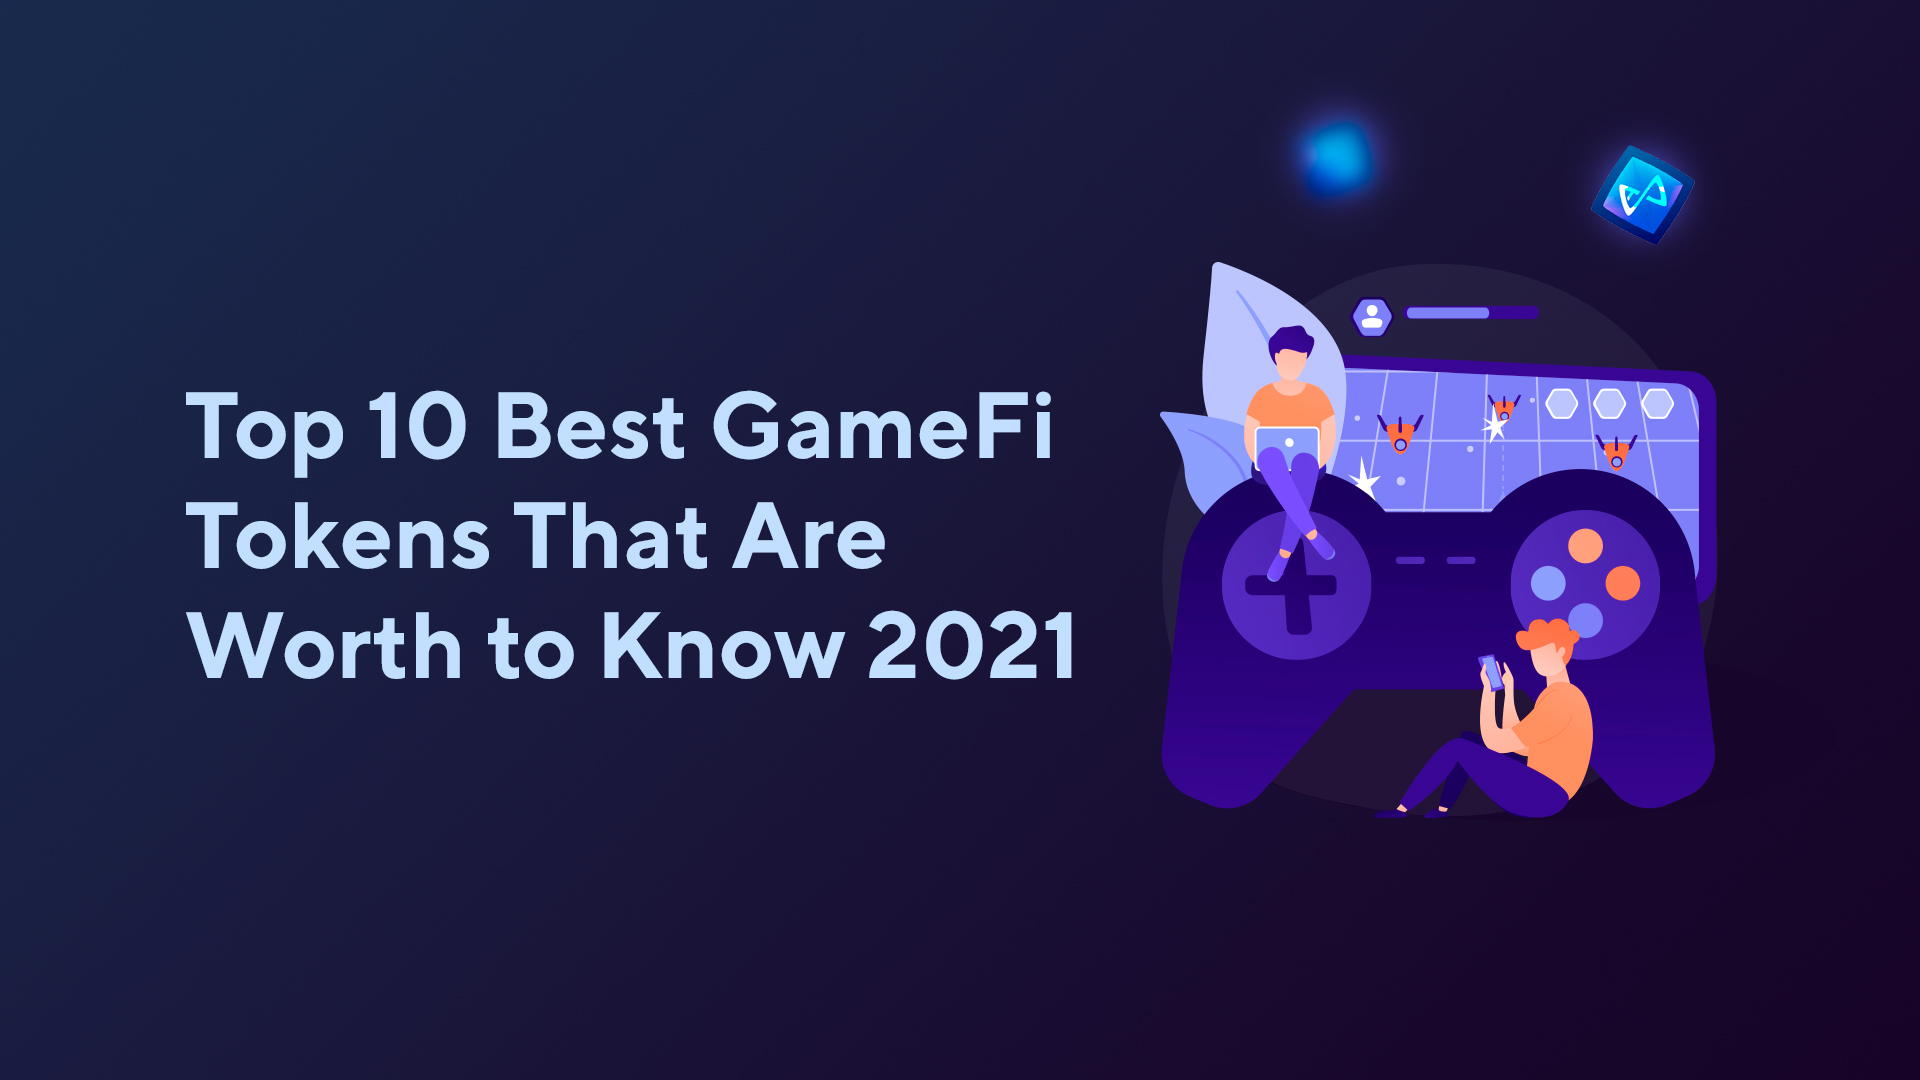 Top 10 Best GameFi Tokens That Are Worth to Know 2022